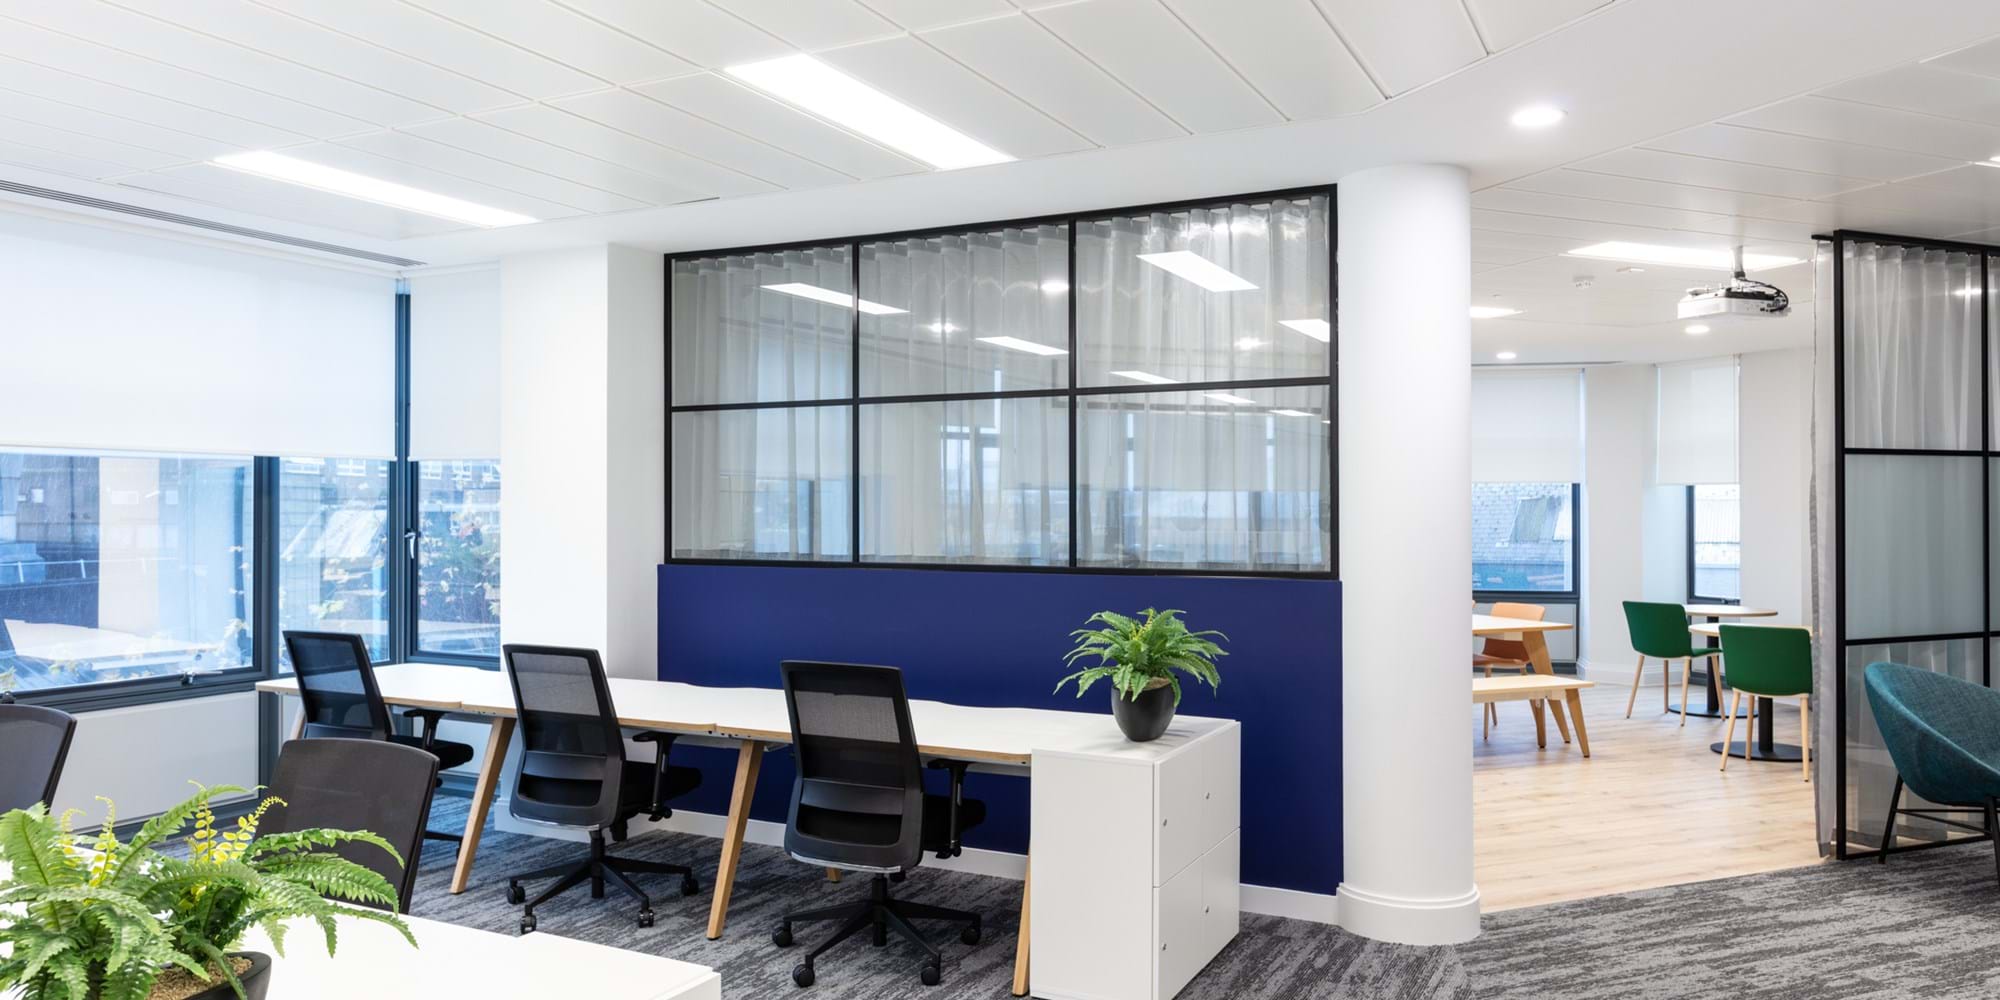 Modus Workspace office design, fit out and refurbishment - Pivot - Guildford - Pivot_Guildford_161220-13.jpg